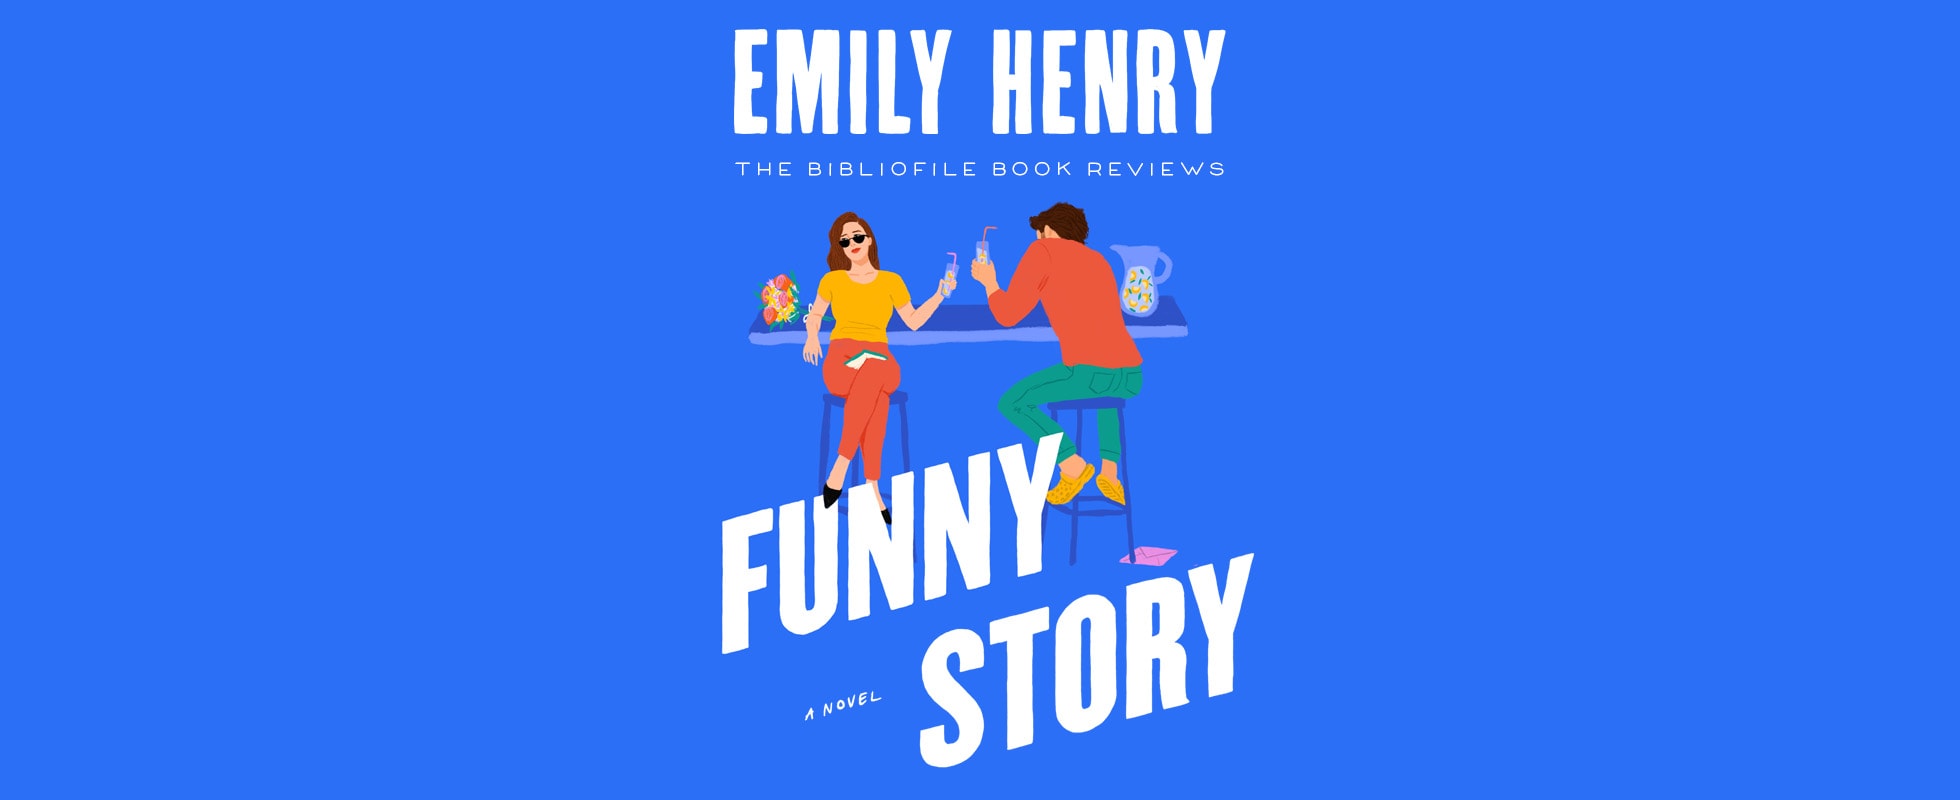 funny story by emily henry book review plot summary synopsis recap discussion spoilers